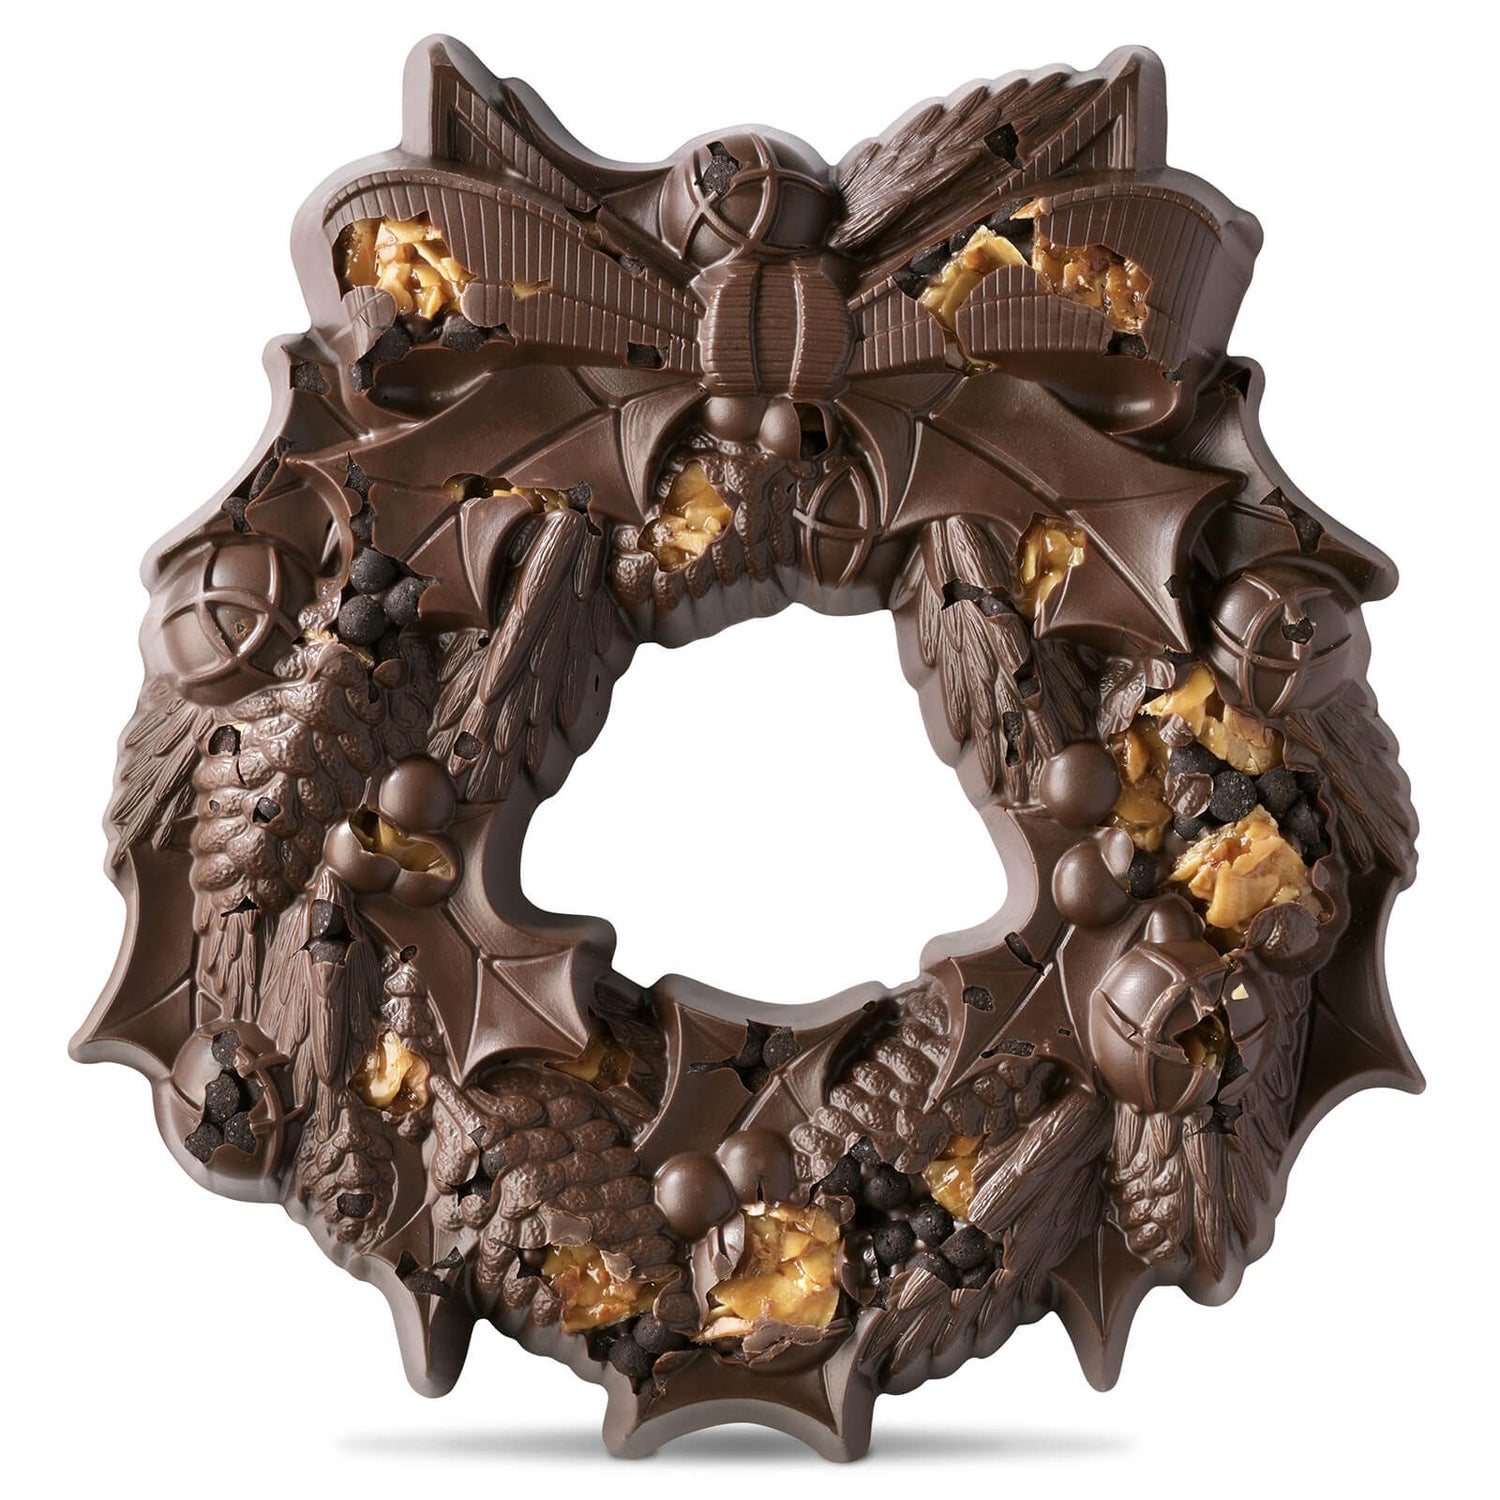 The Large Festive Wreath - Cookie